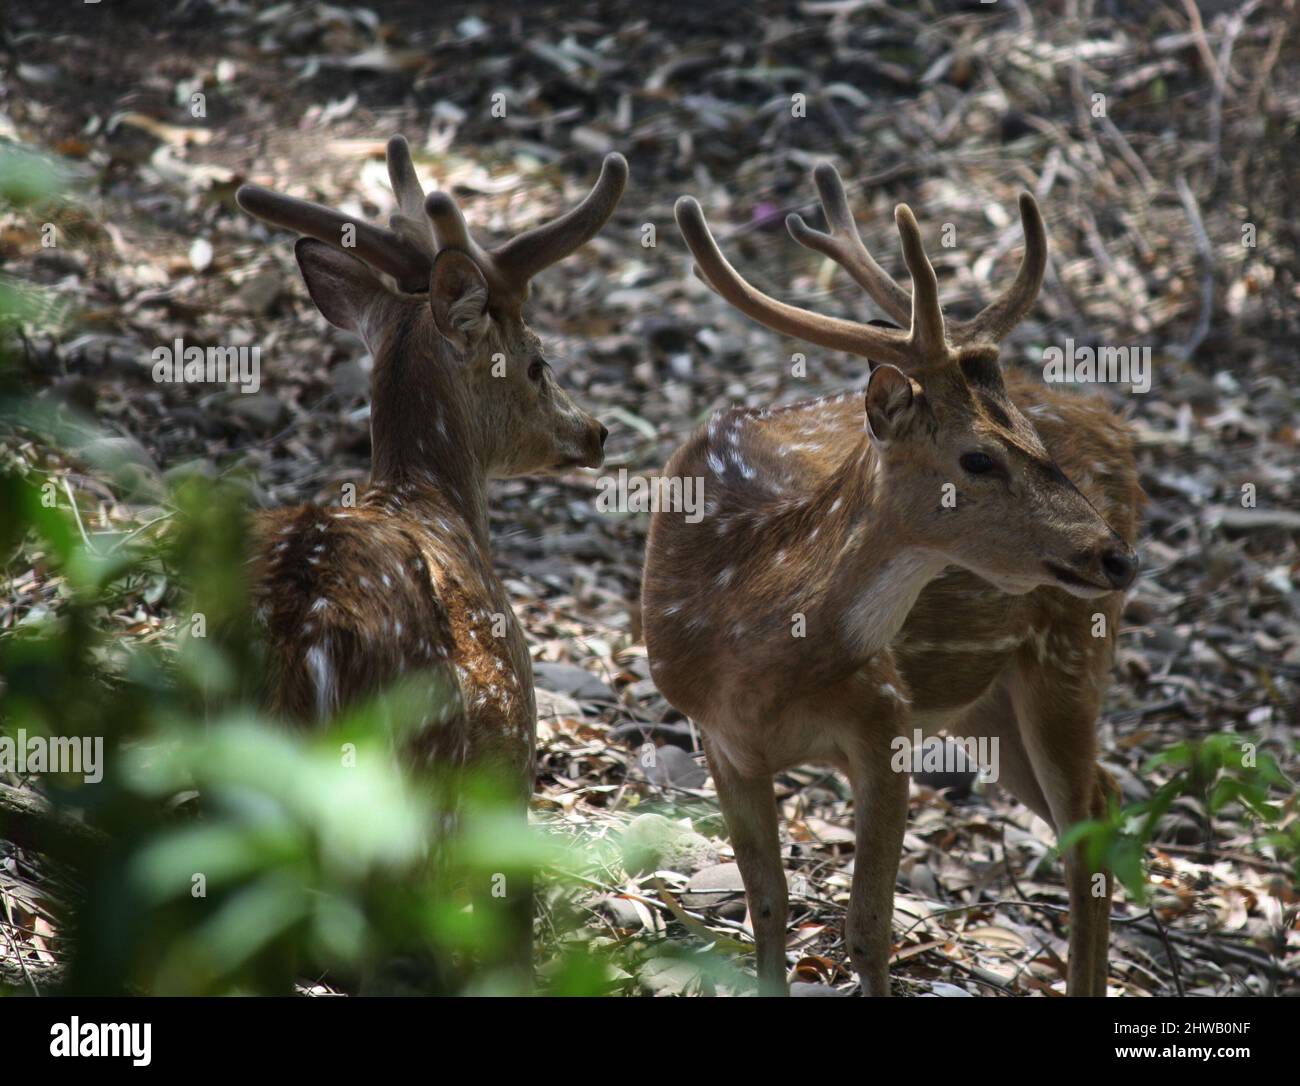 Cheetal or spotted deer (Axis axis) foraging in the forest : (pix SShukla) Stock Photo